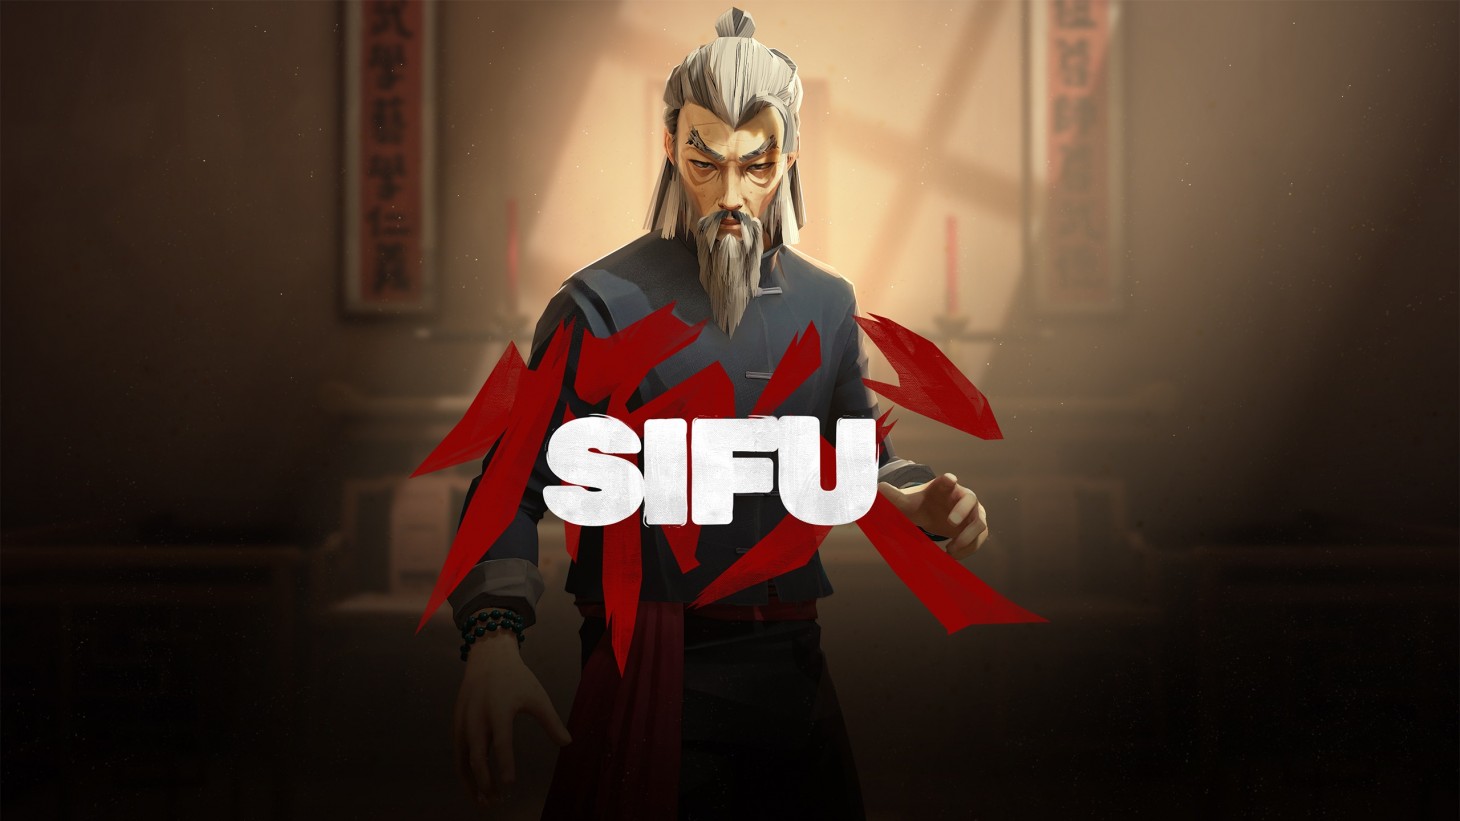 Become A Master Martial Artist When Sifu Drops In Early 2022 - Game Informer